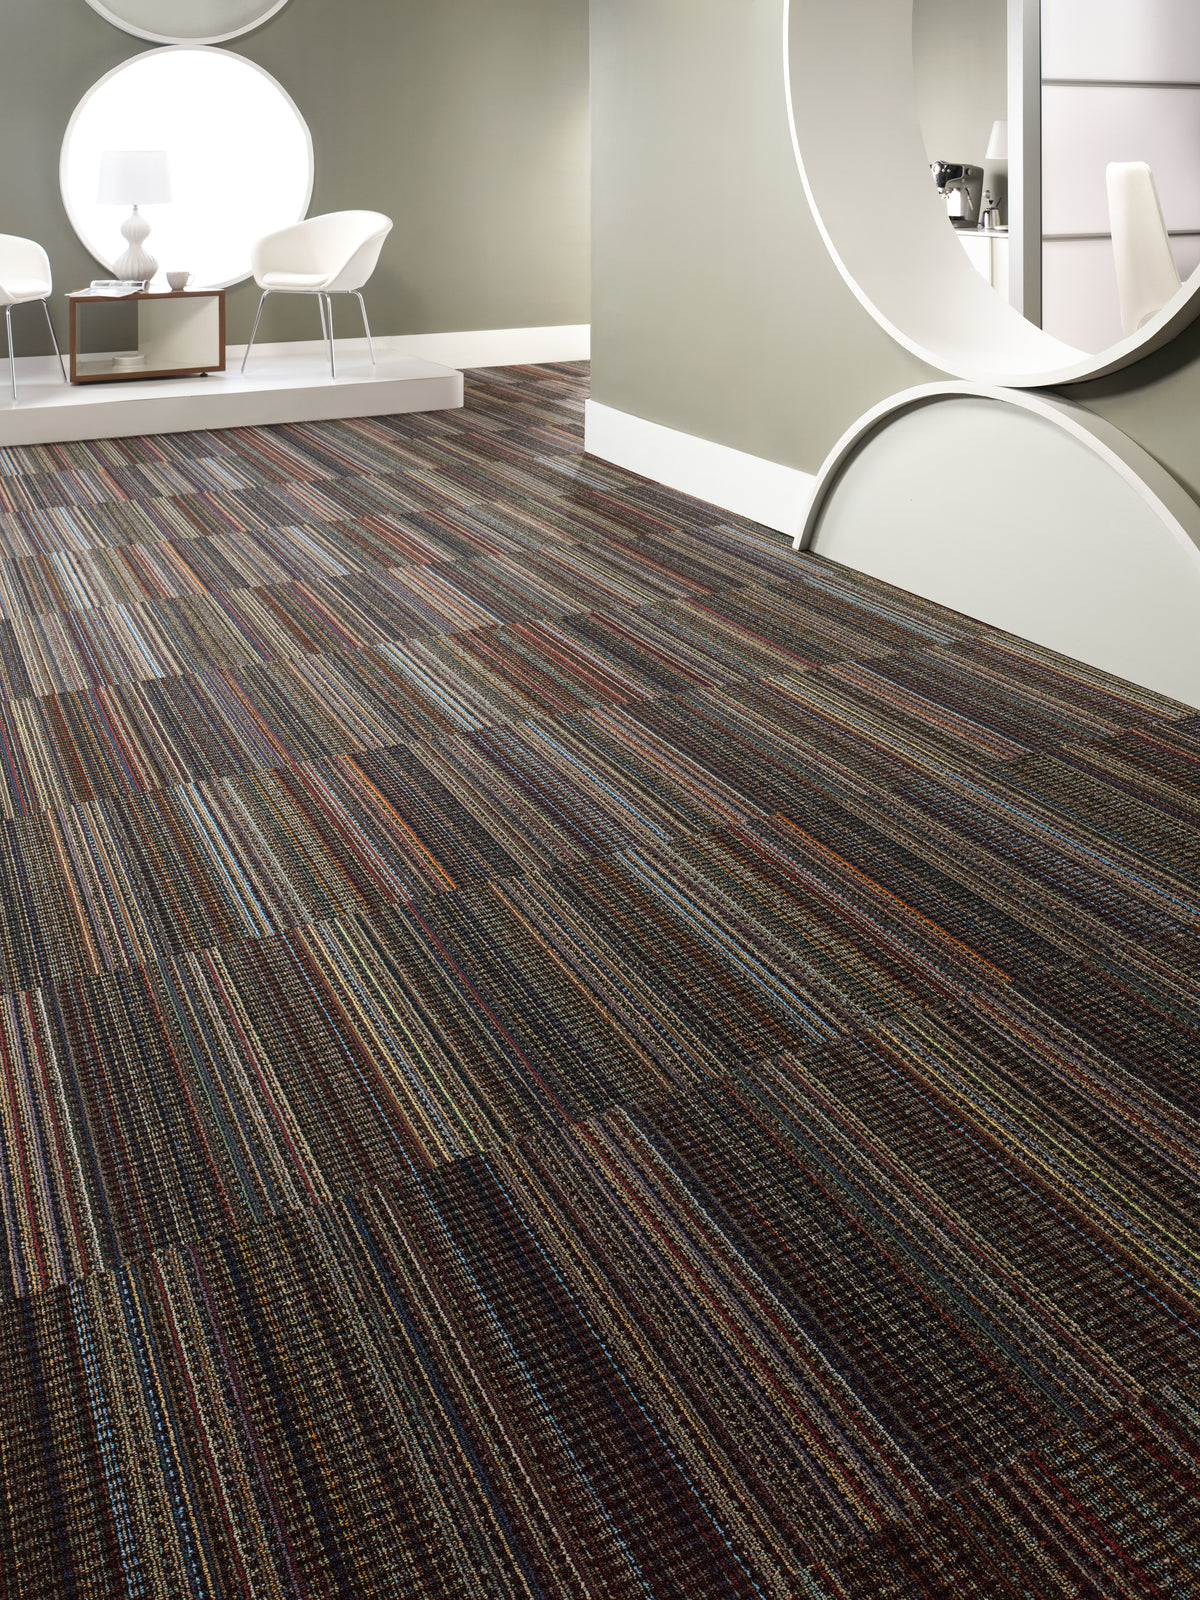 Mohawk Group - Mixology - Coolly Noted - Carpet Tile - Smoky Martini Installed